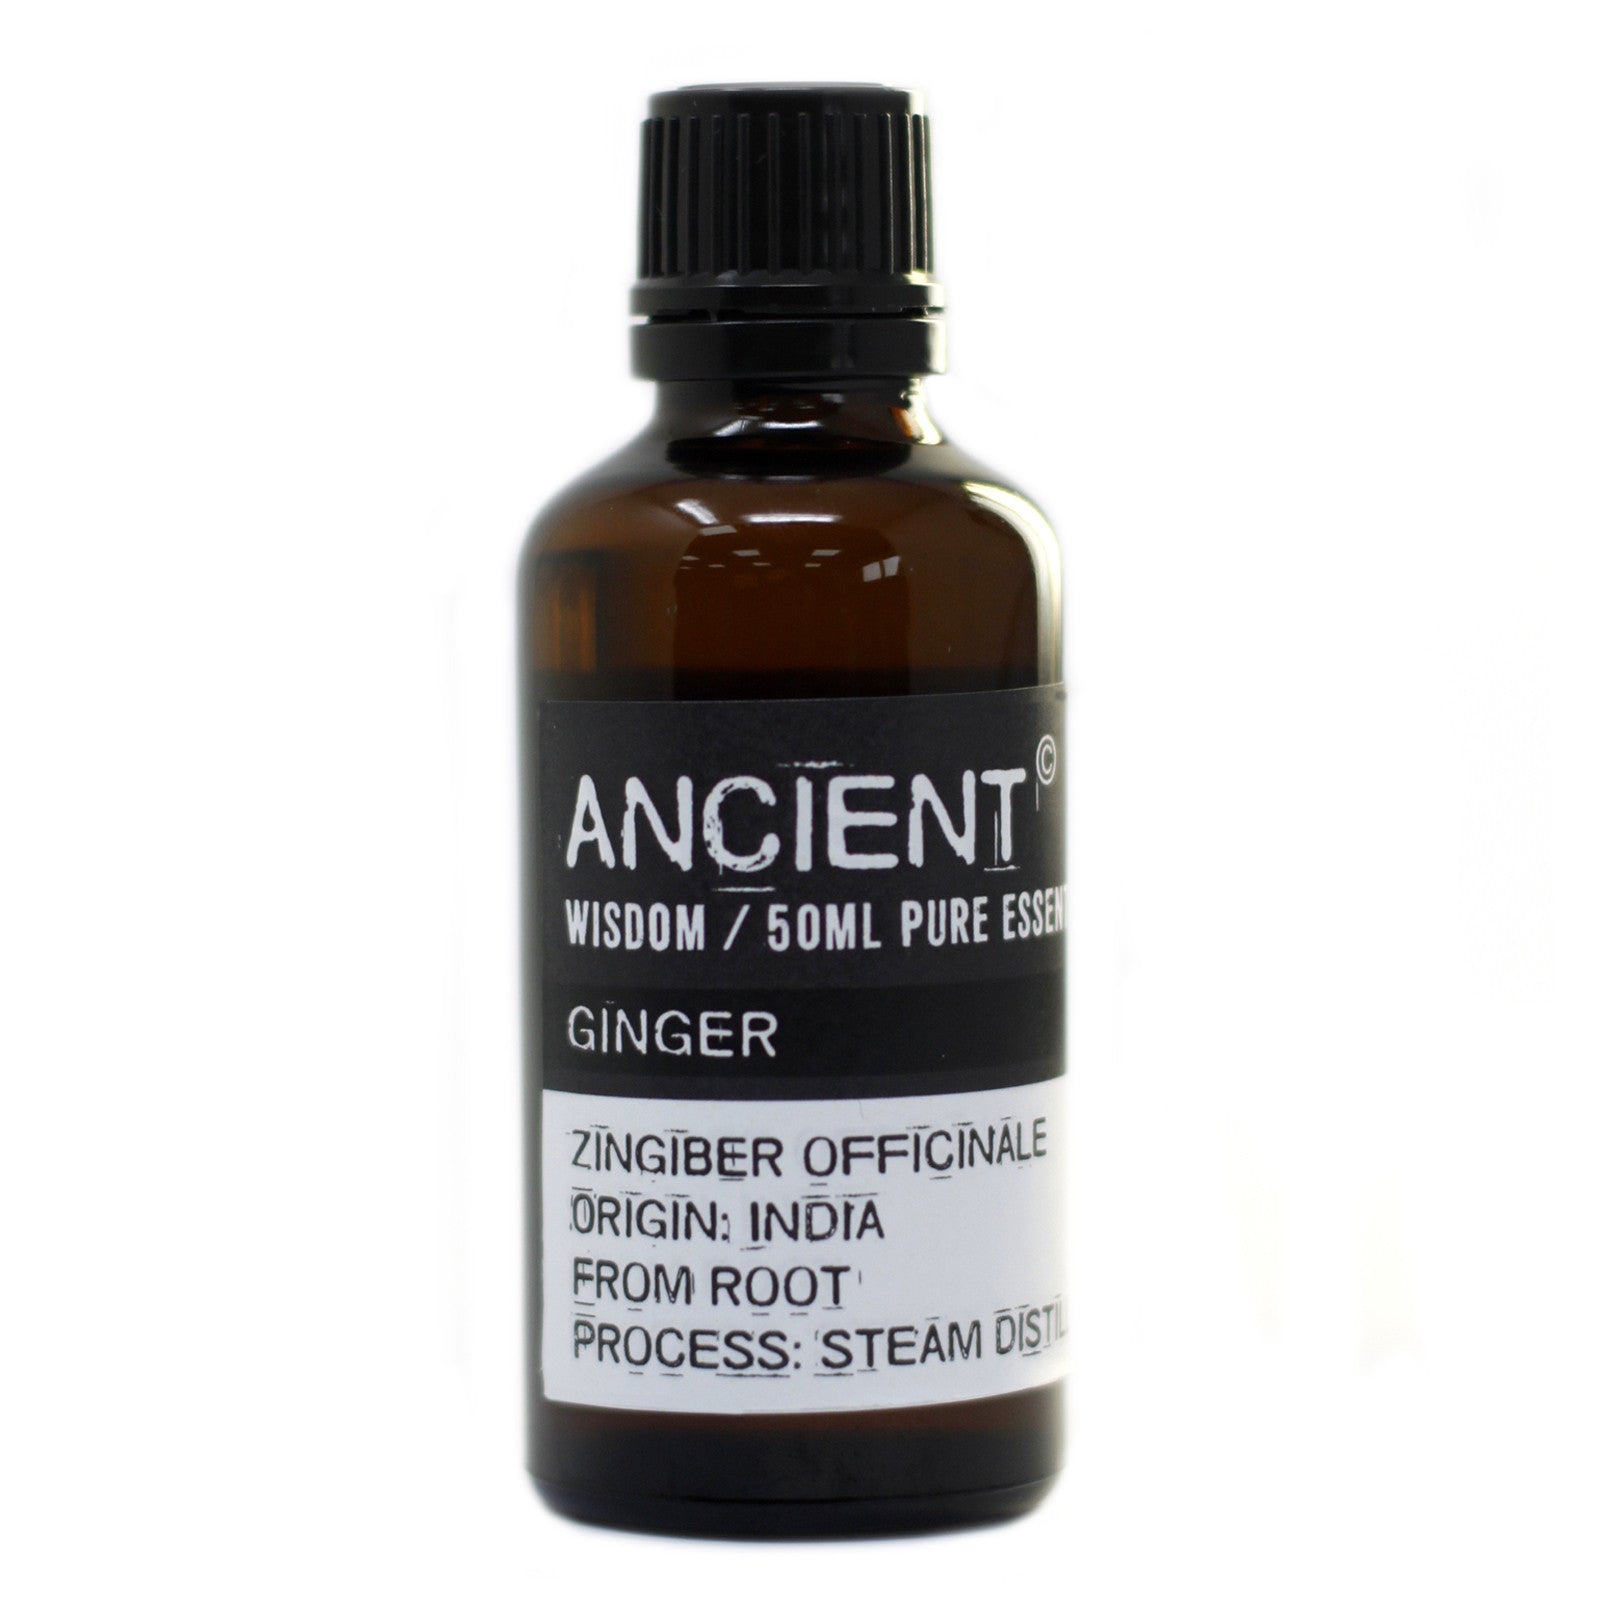 View Ginger 50ml information